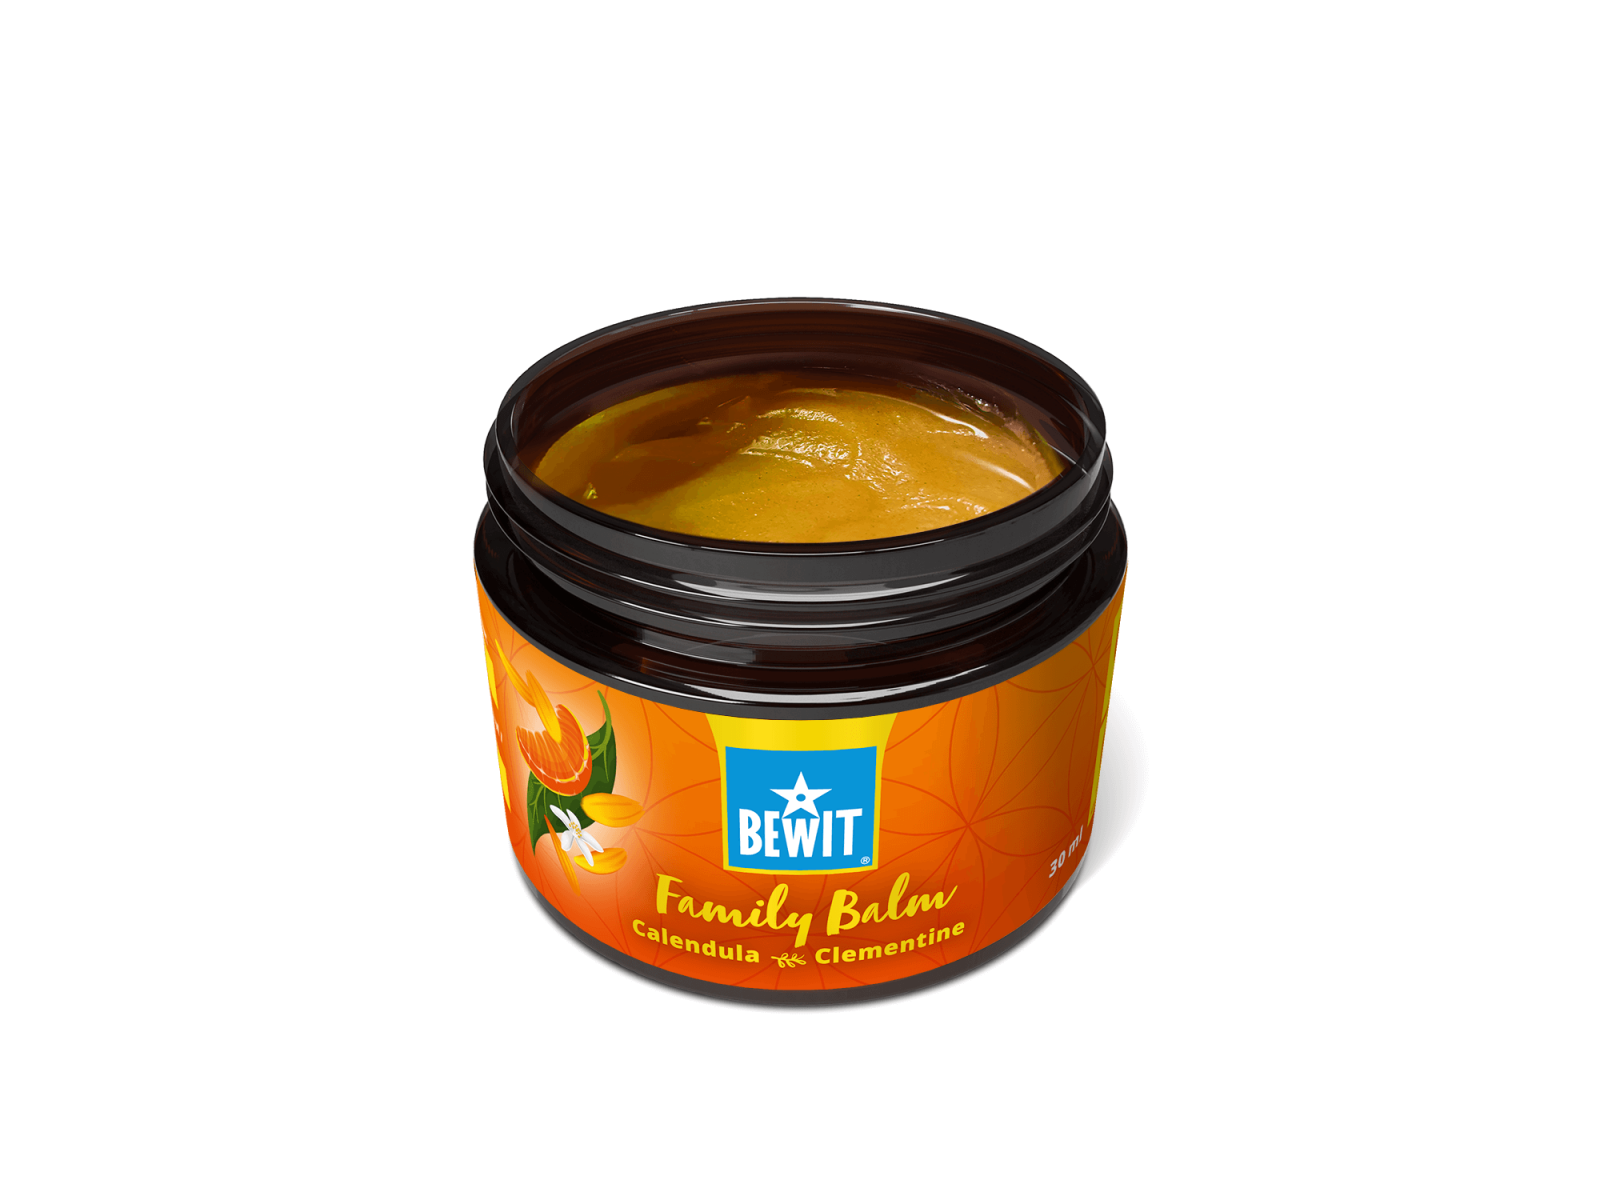 BEWIT FAMILY BALM CALENDULA AND CLEMENTINE - CARING BALM FOR THE WHOLE FAMILY - 6